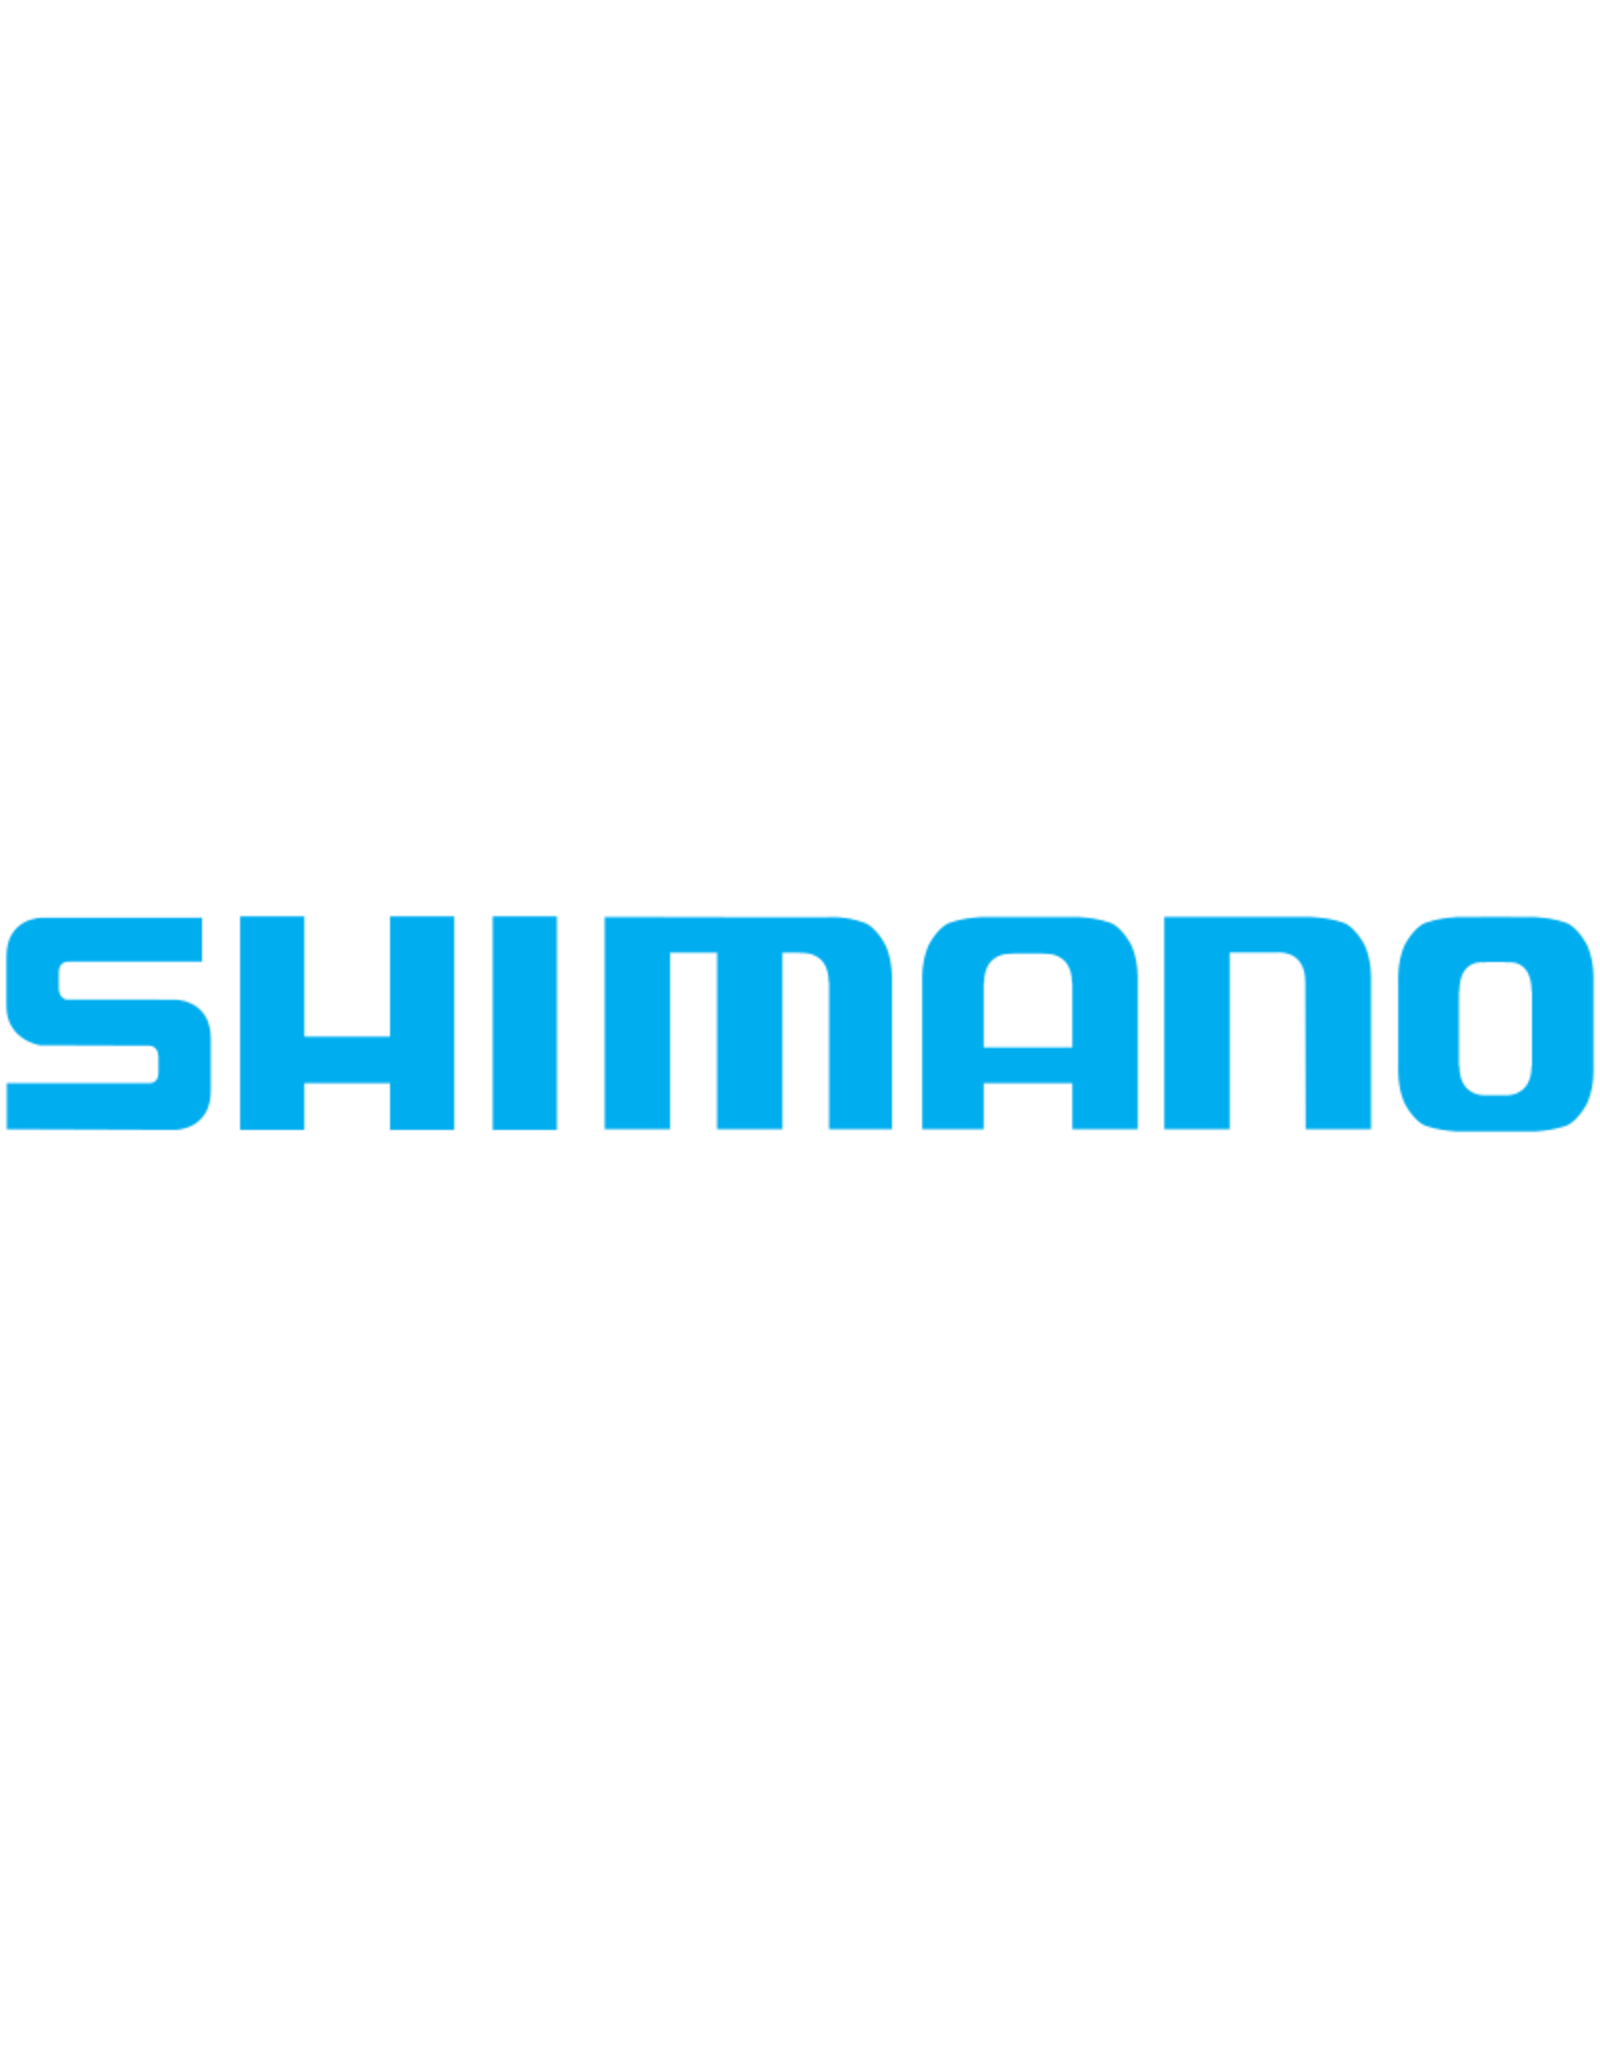 Shimano RD16148  HANDLE ASSEMBLY